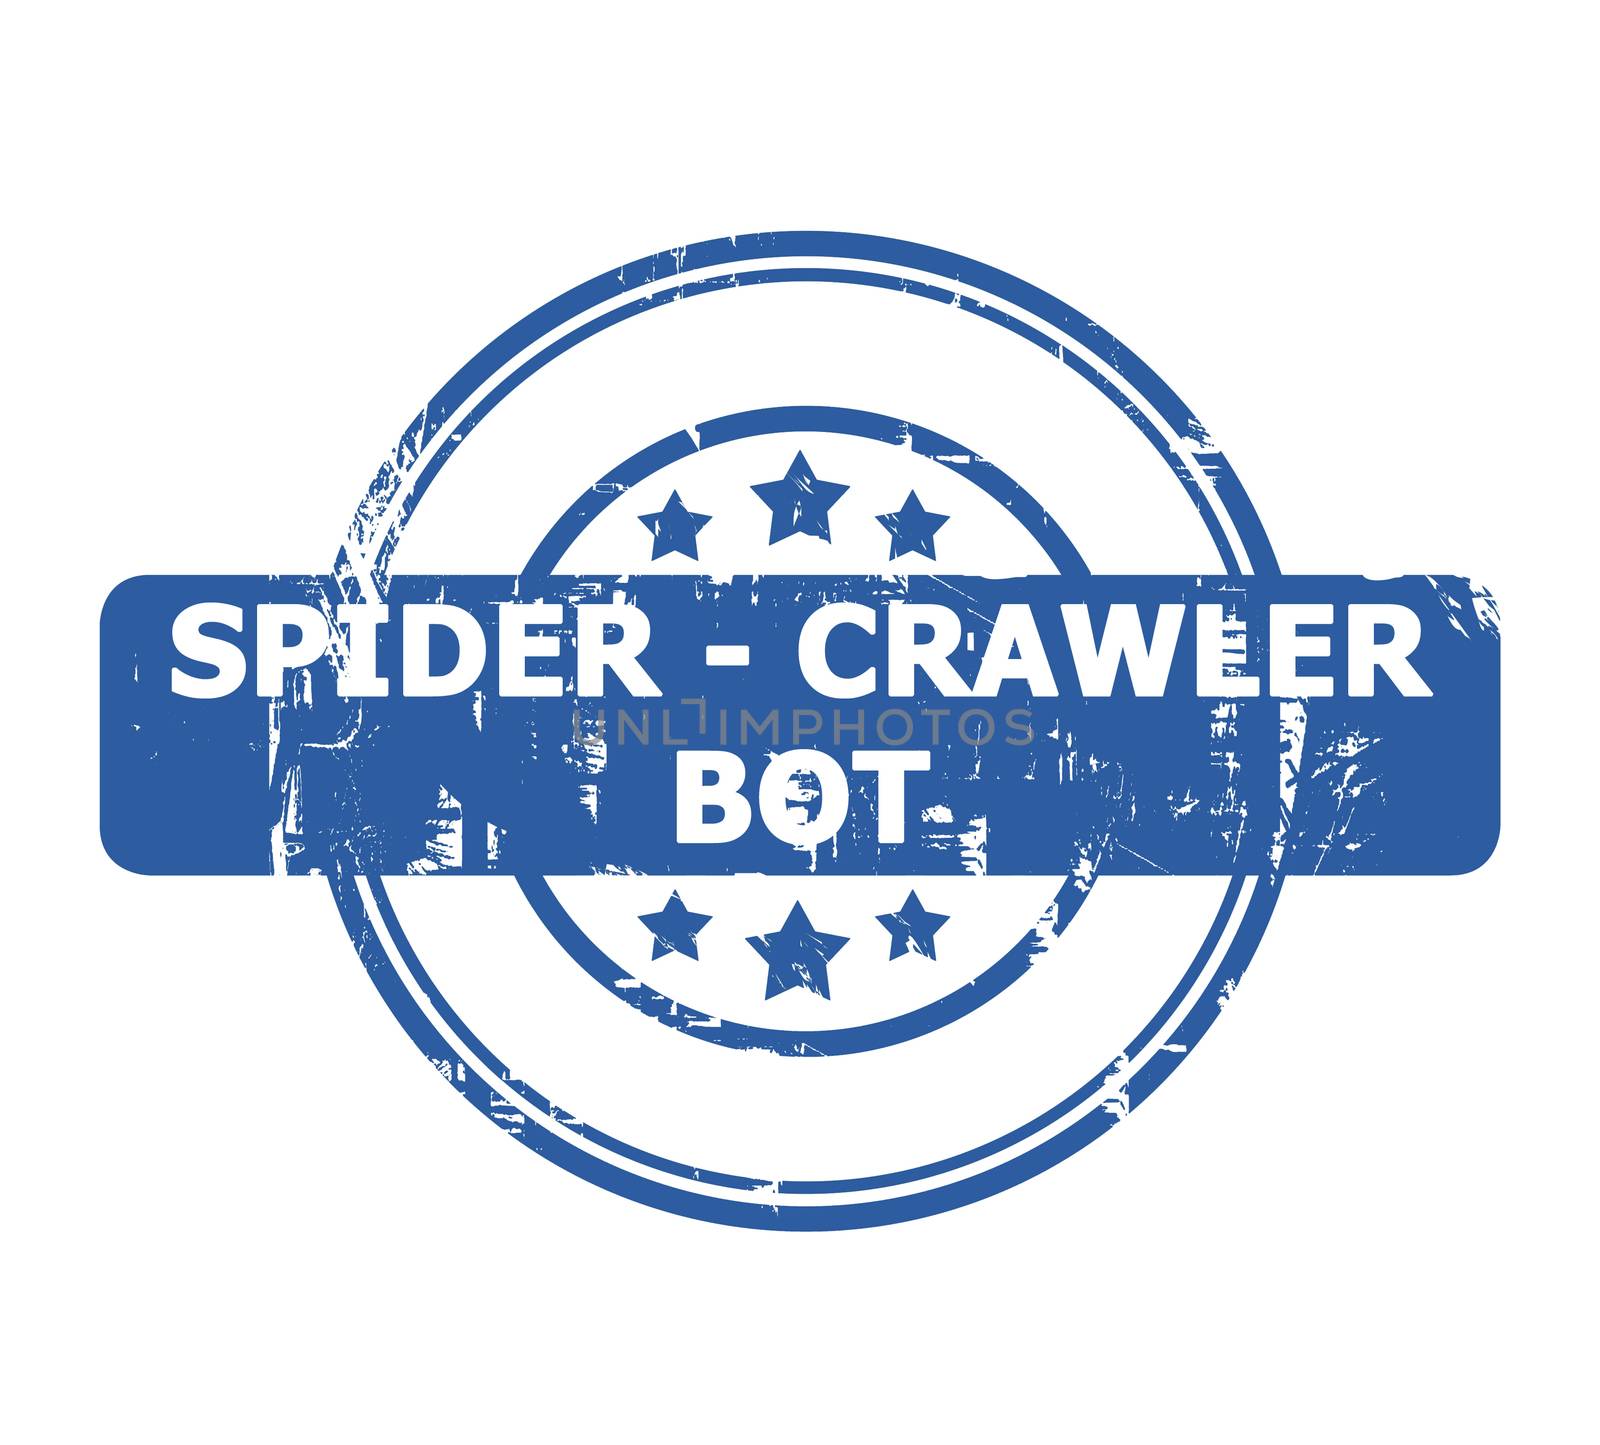 Spider Crawler Bot Stamp with stars isolated on a white background.